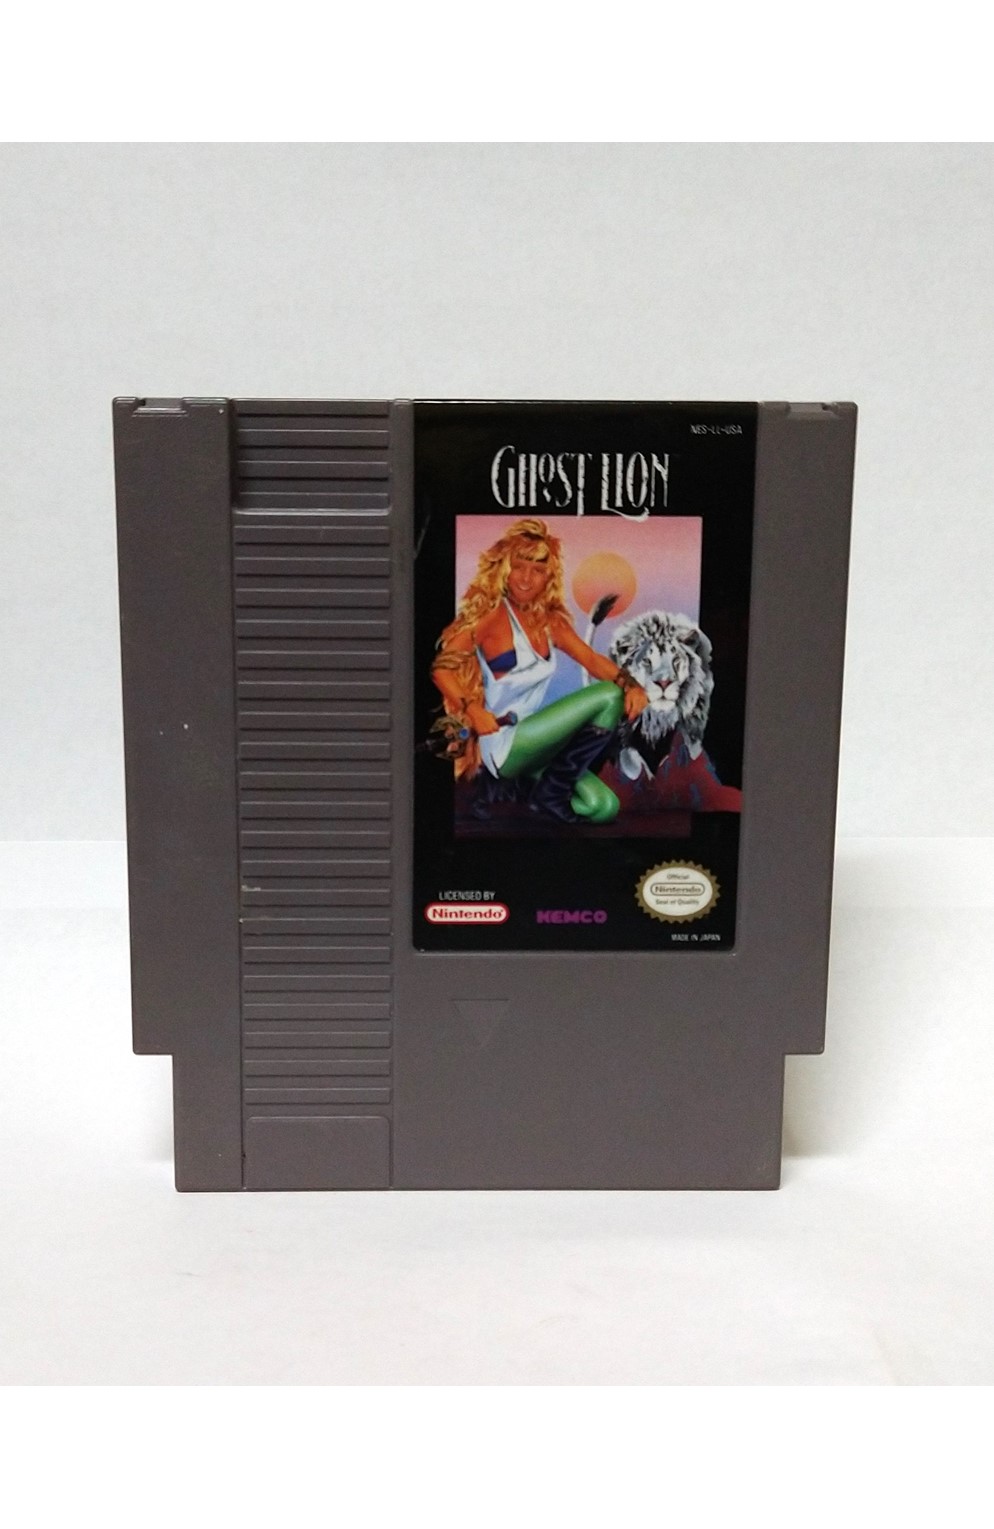 Nintendo Nes Ghost Lion Cartridge Only (Very Good)